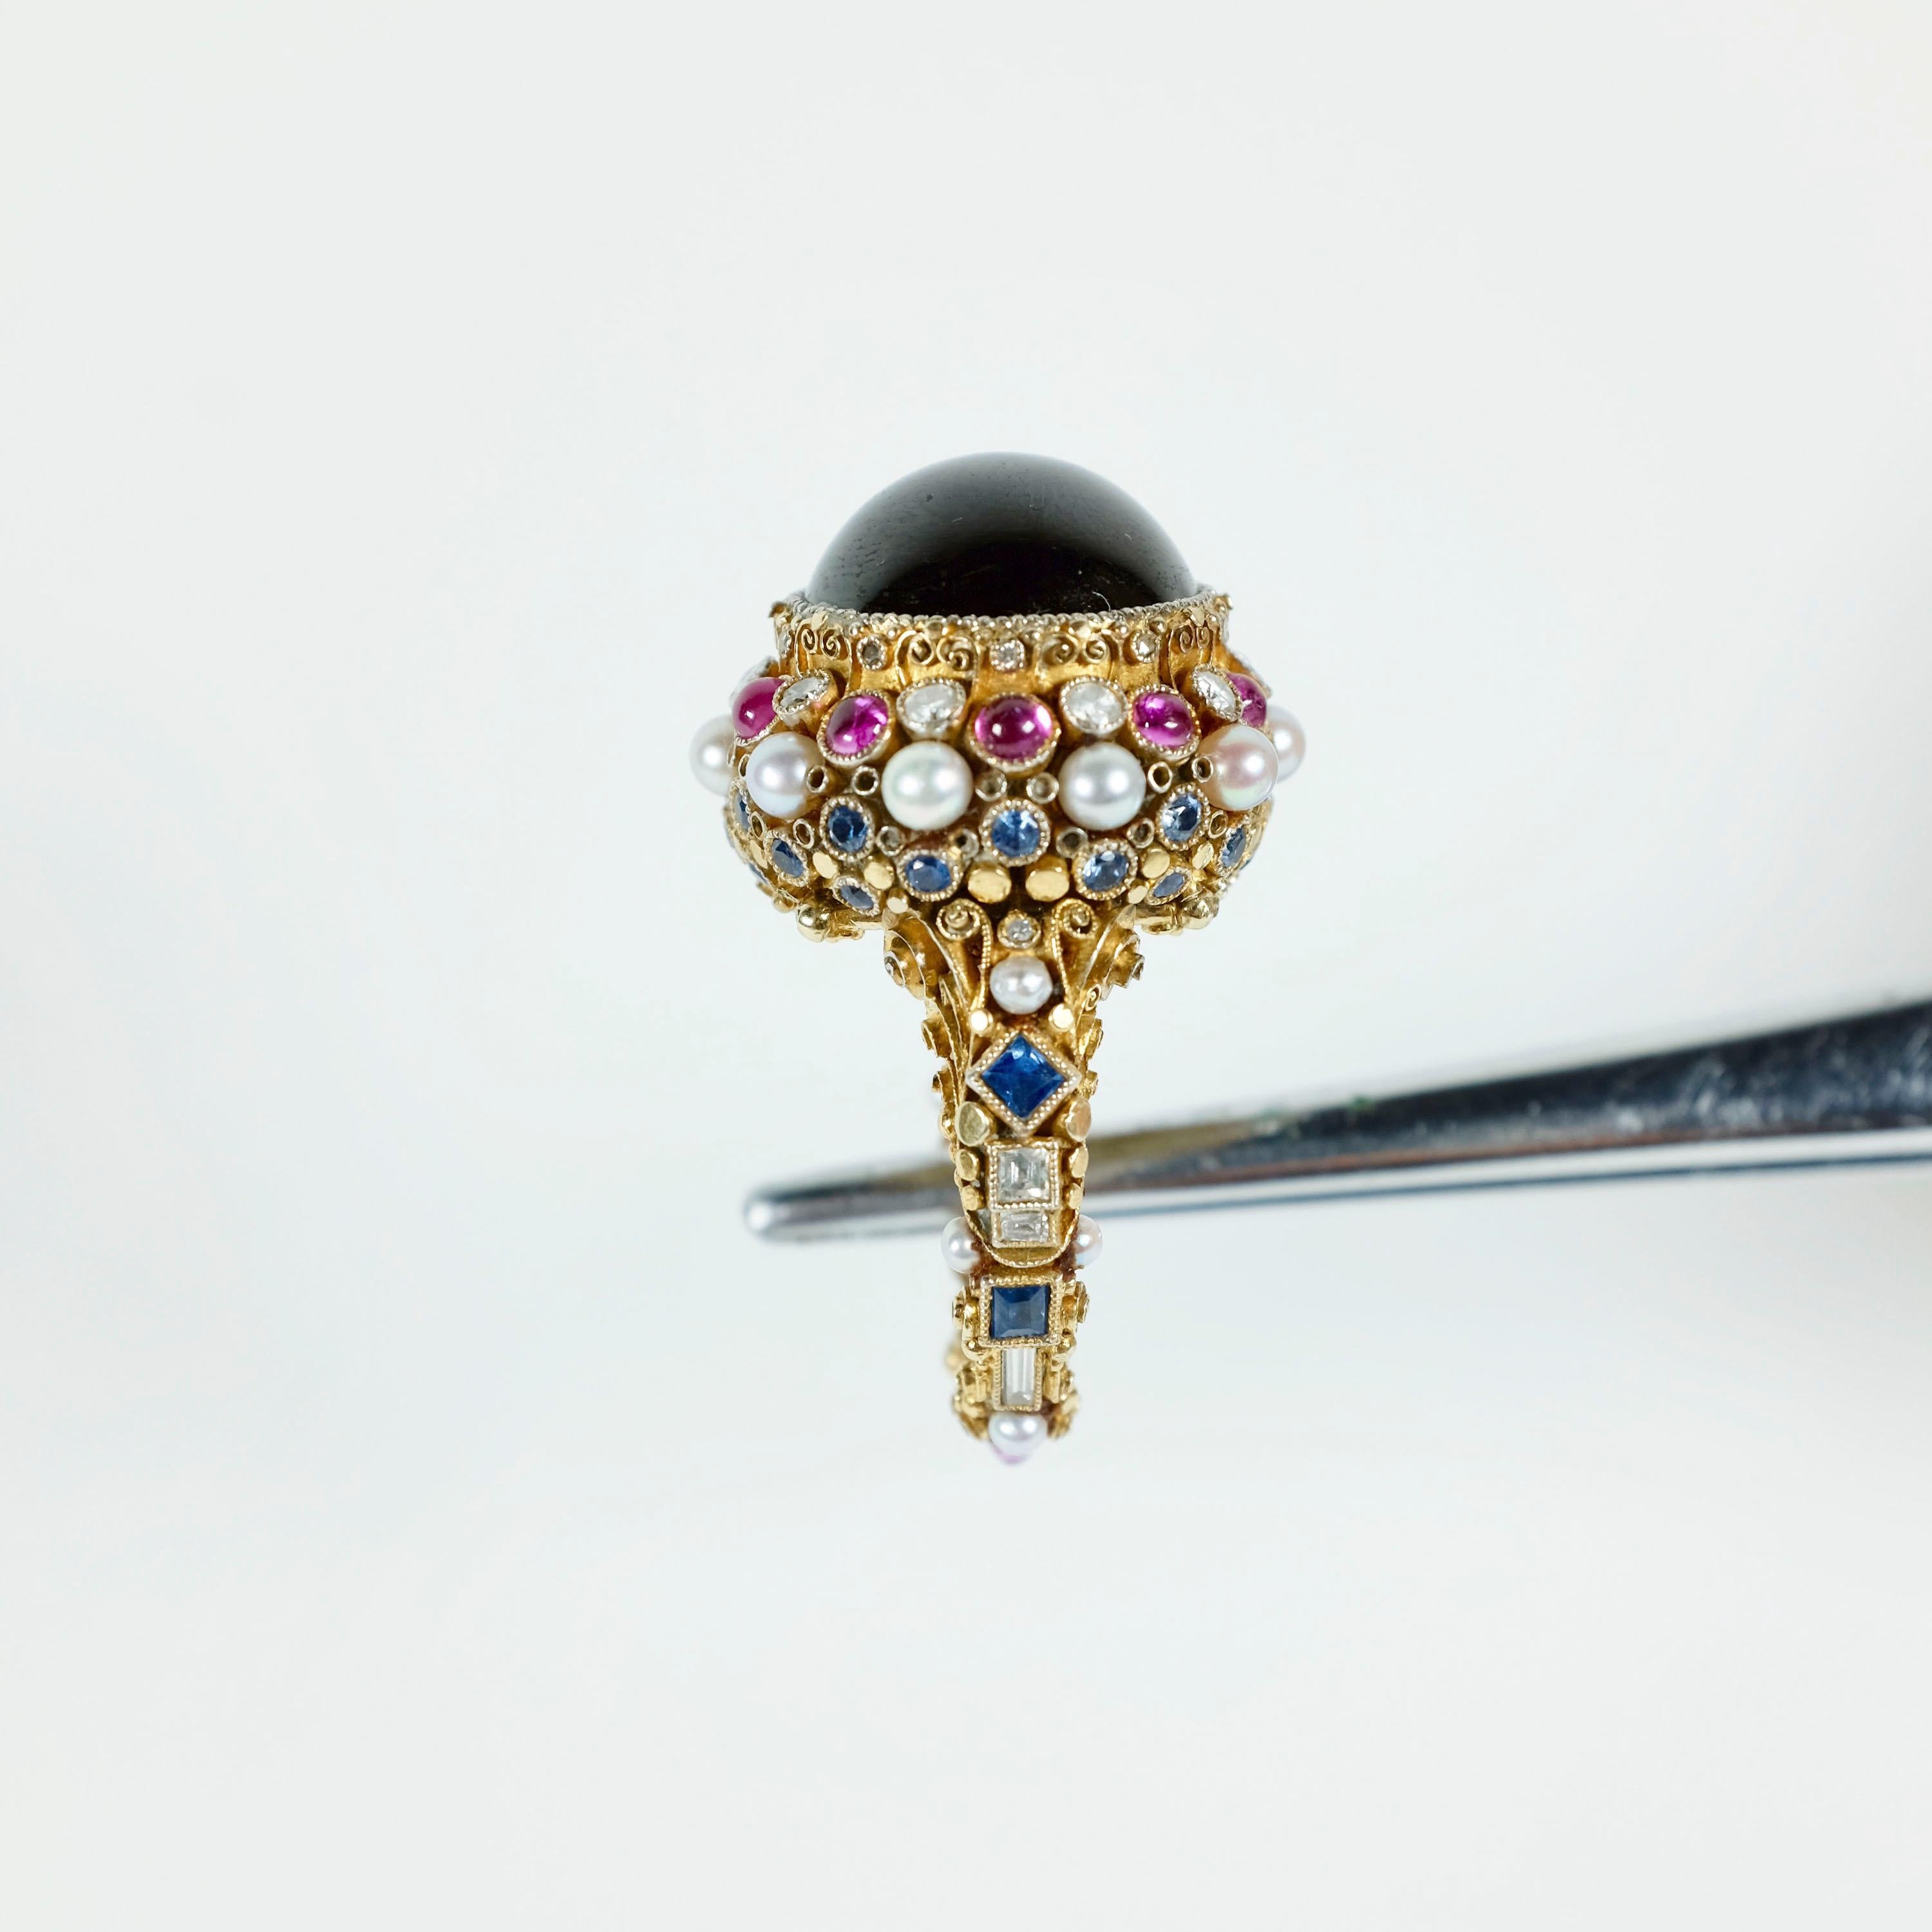 Ring by Elmar Seidler, Set with a cabochon garnet, the shoulders and mount set with brilliant-, step-cut, baguette and rose diamonds, seed pearls, circular and square cut sapphires and cabochon rubies, the underside of the mount opens to reveal a